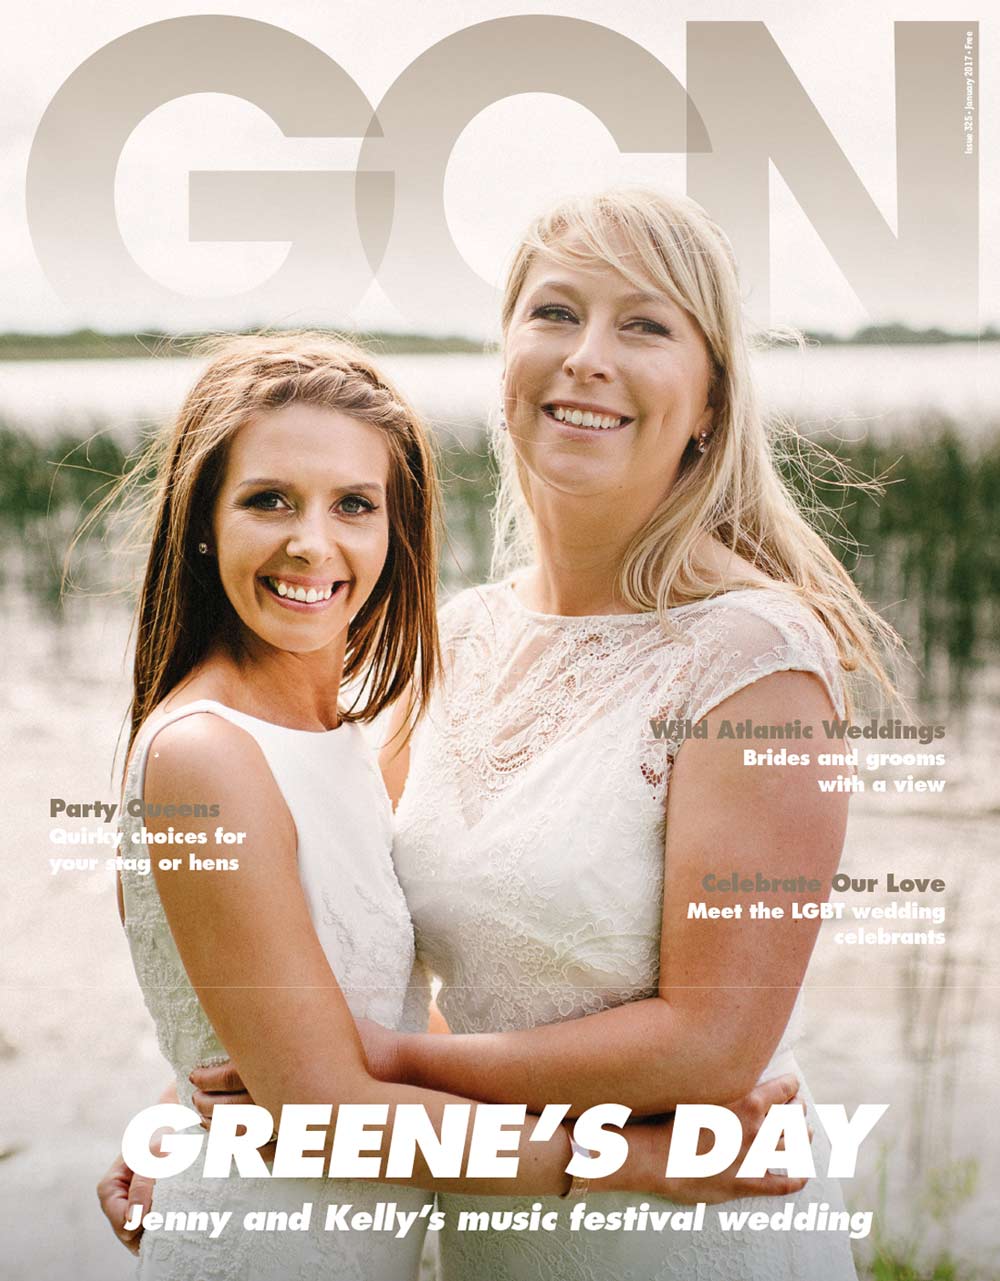 Two women (Jenny Greene and her wife Kelly Keogh) in white wedding dresses on the cover of GCN's wedding issue